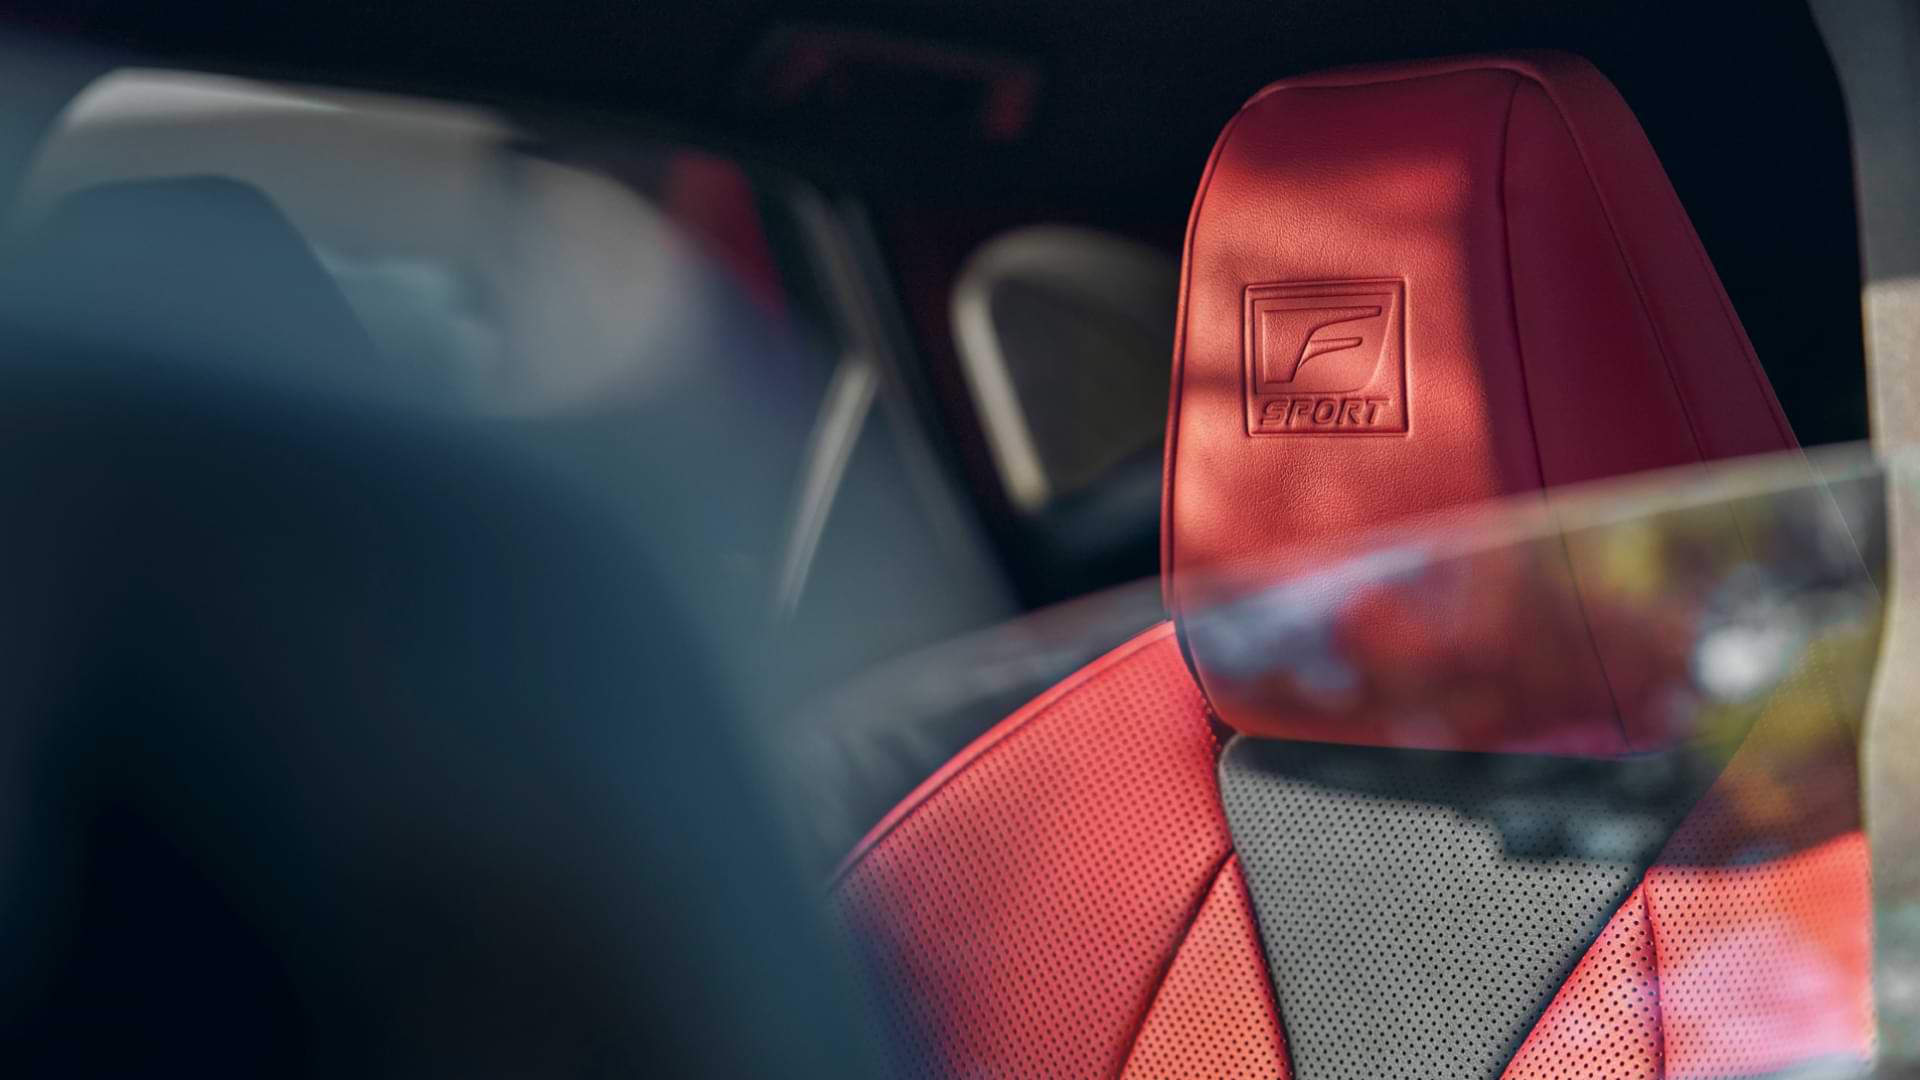 The red leather F Sport Interior of the NX.